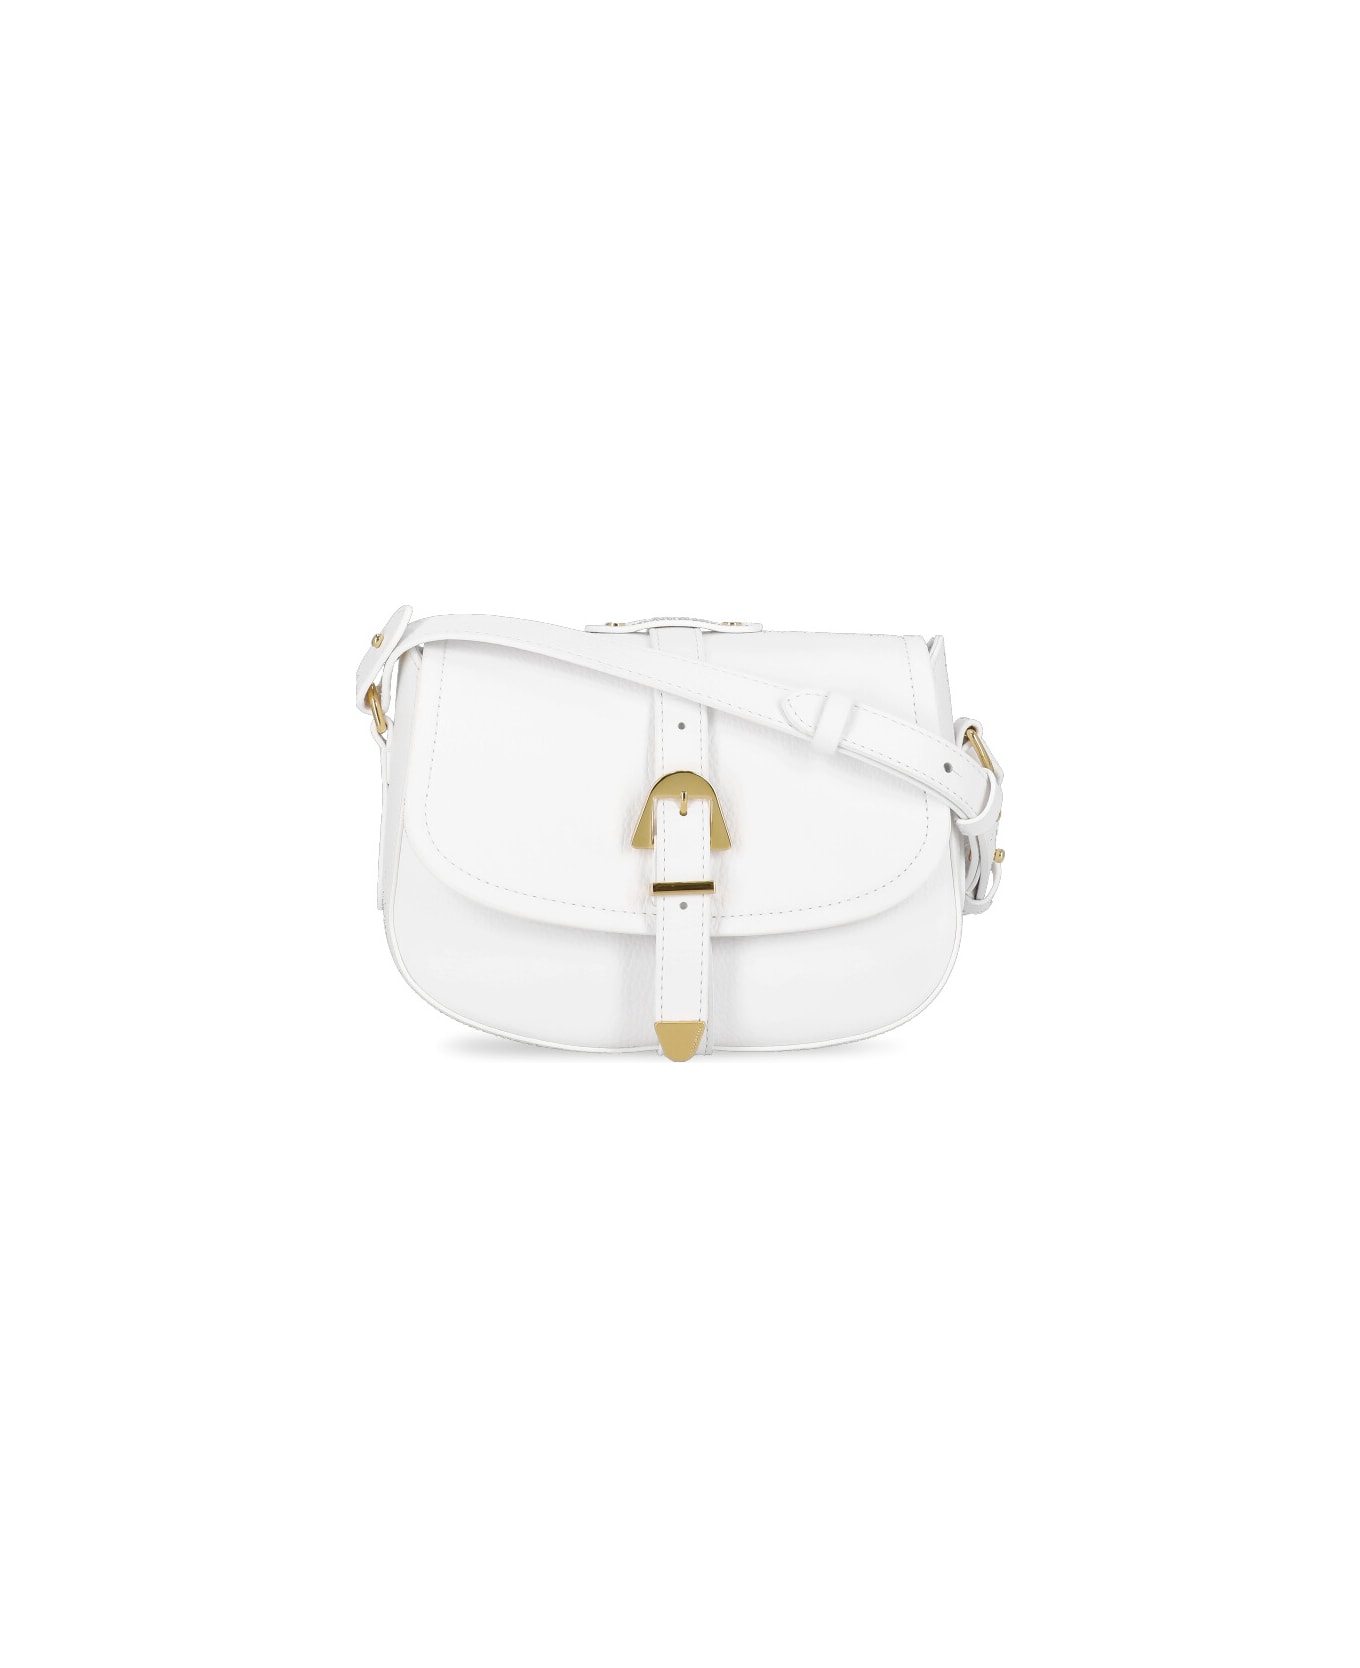 Coccinelle Magalu Bag - White